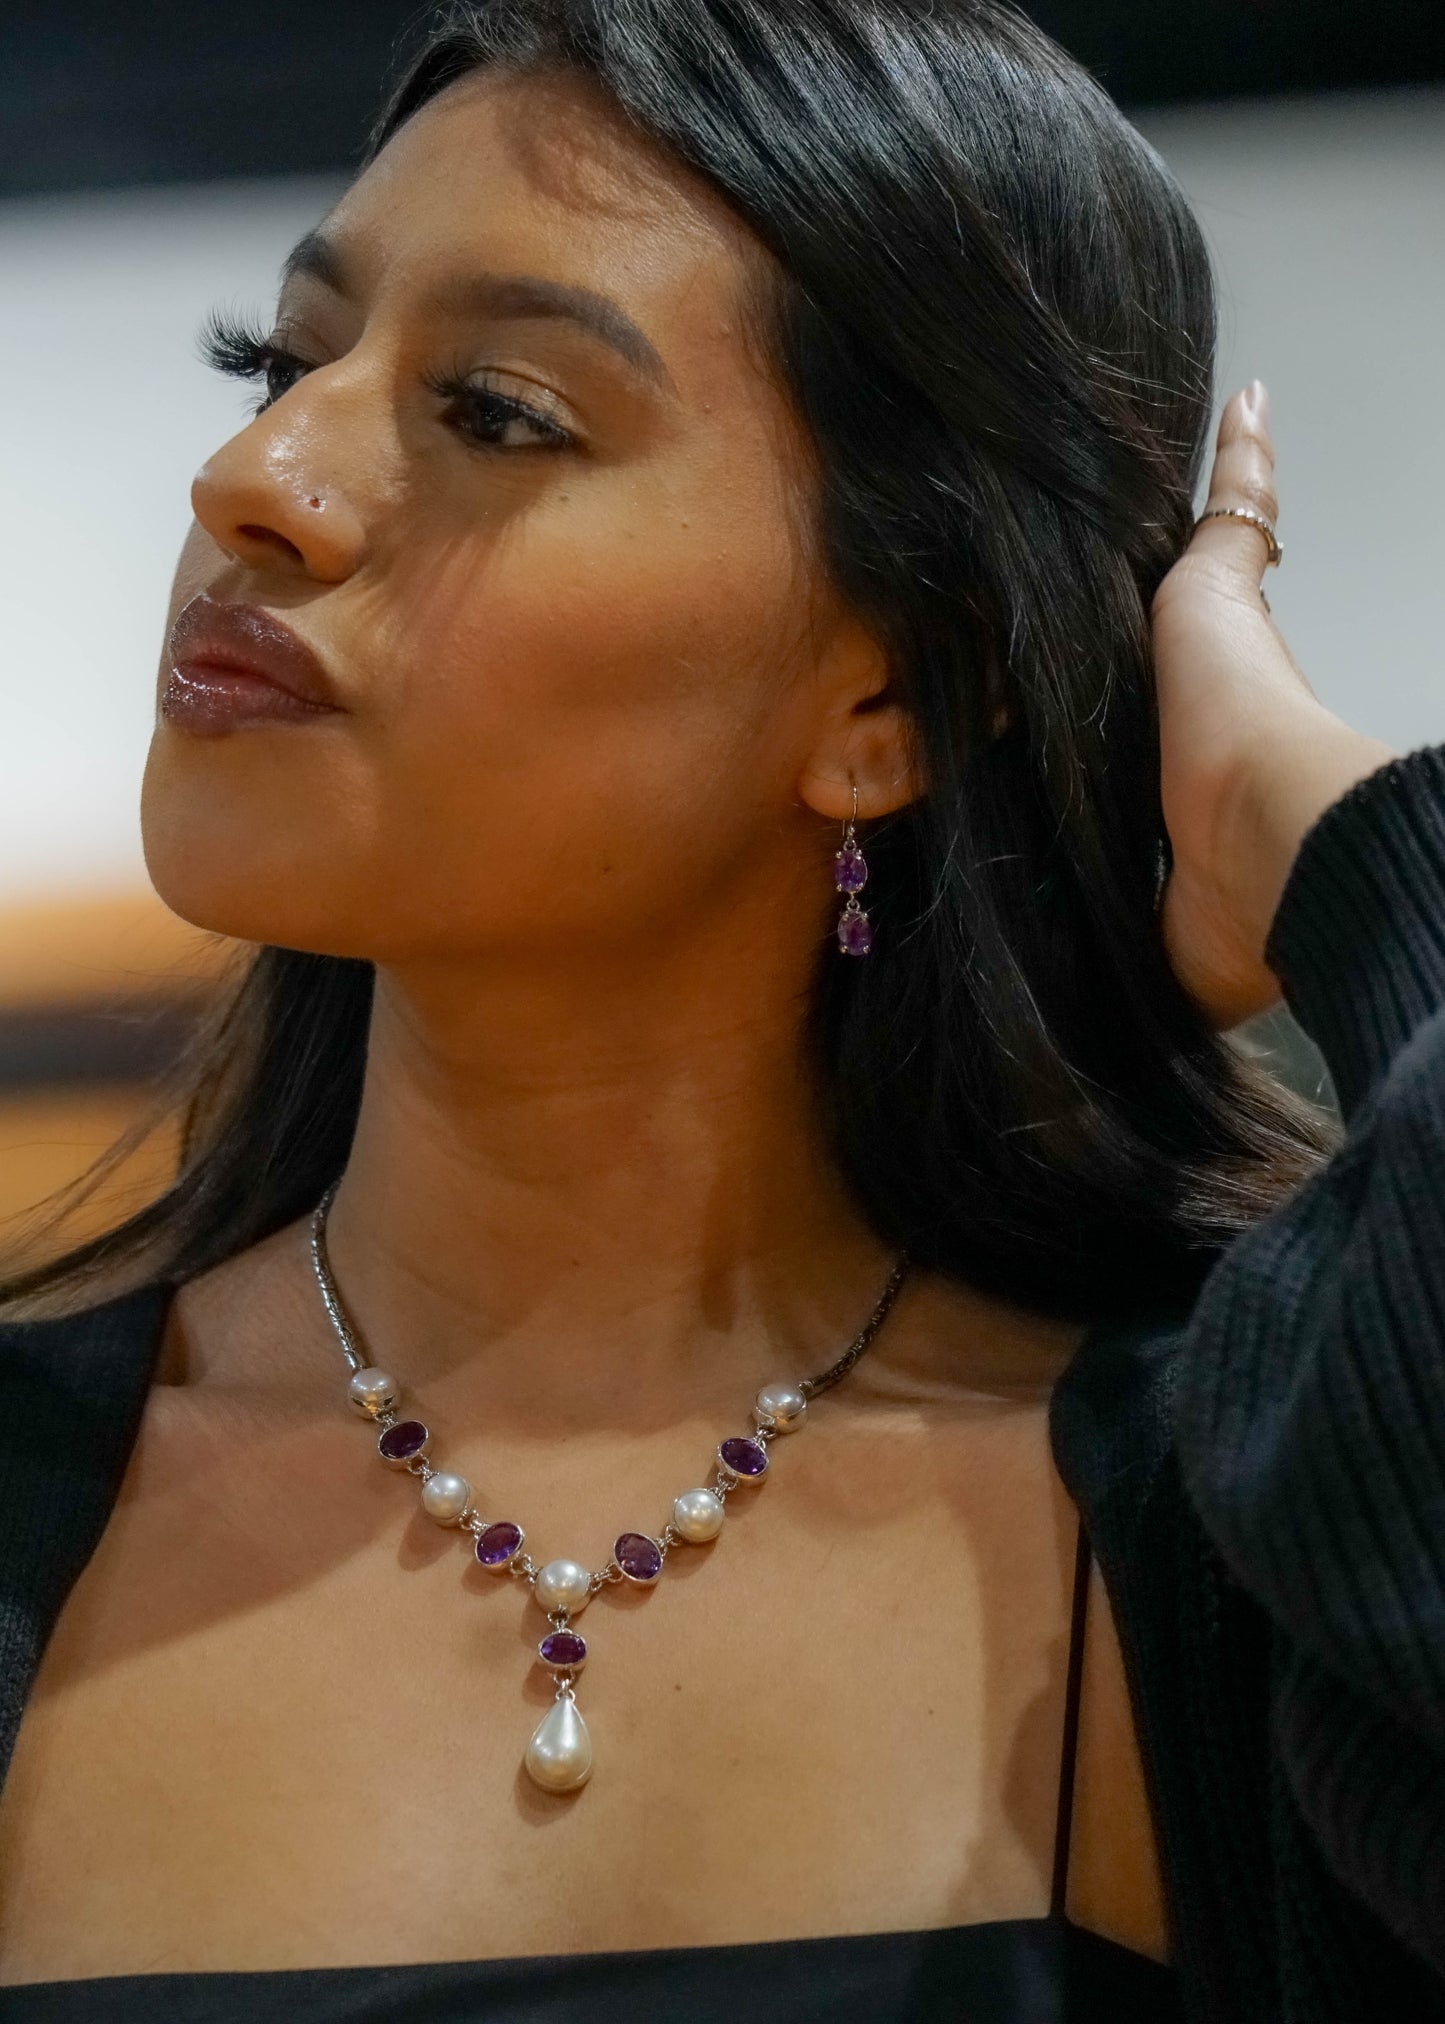 
                  
                    A woman wearing a black top displays a stunning Pearl and Gemstone Statement Necklace, along with matching earrings. She has long, dark hair and appears to be adjusting it with one hand.
                  
                